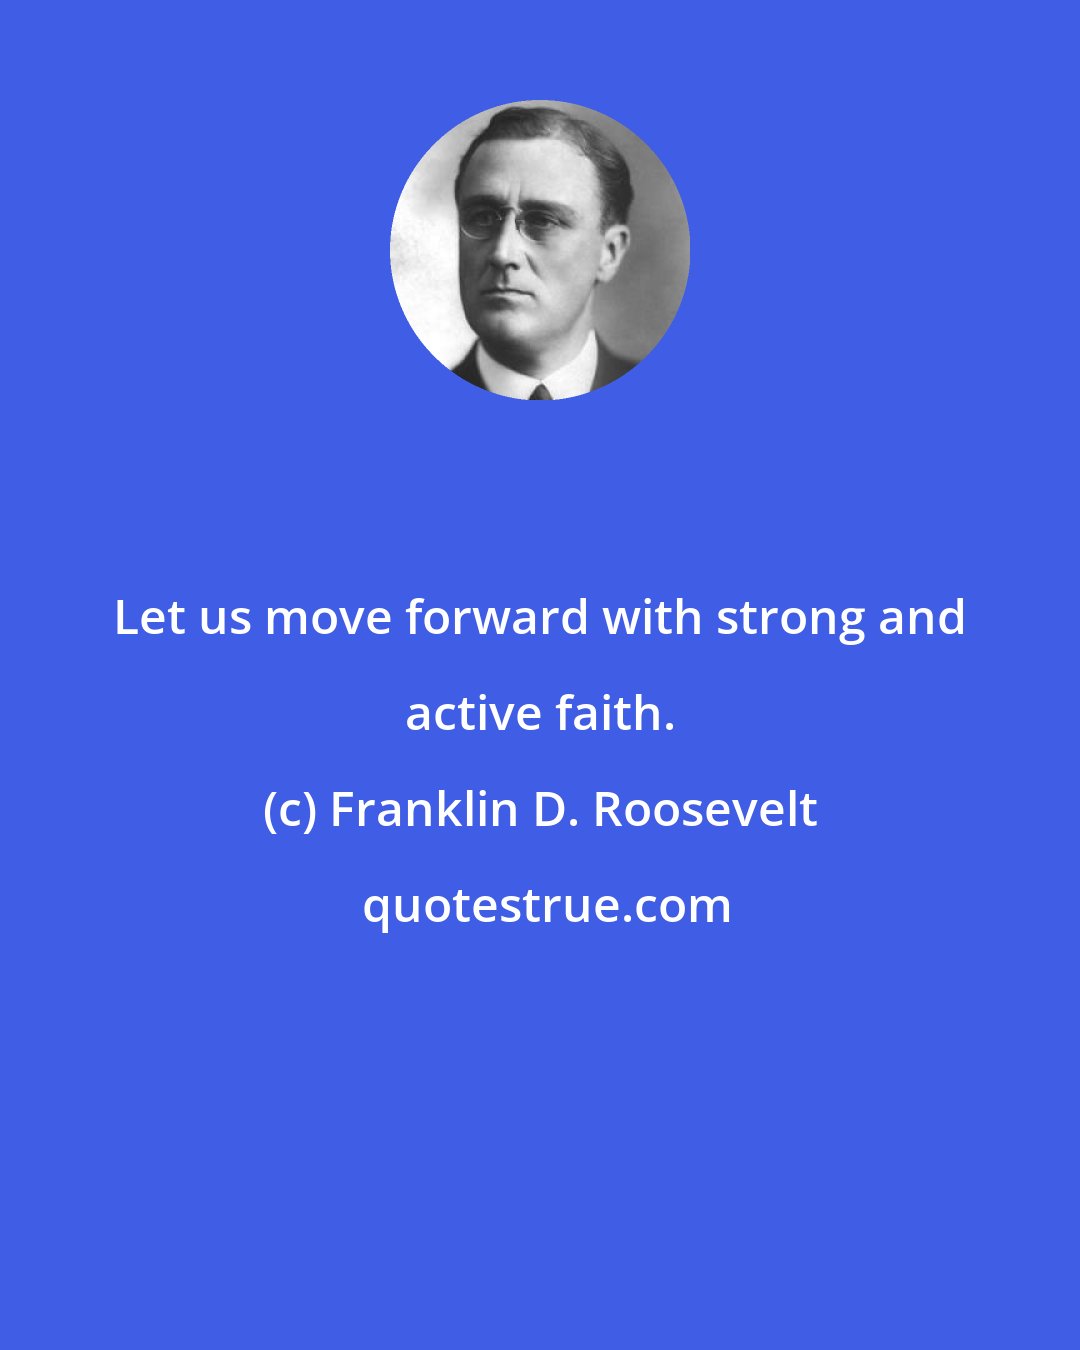 Franklin D. Roosevelt: Let us move forward with strong and active faith.